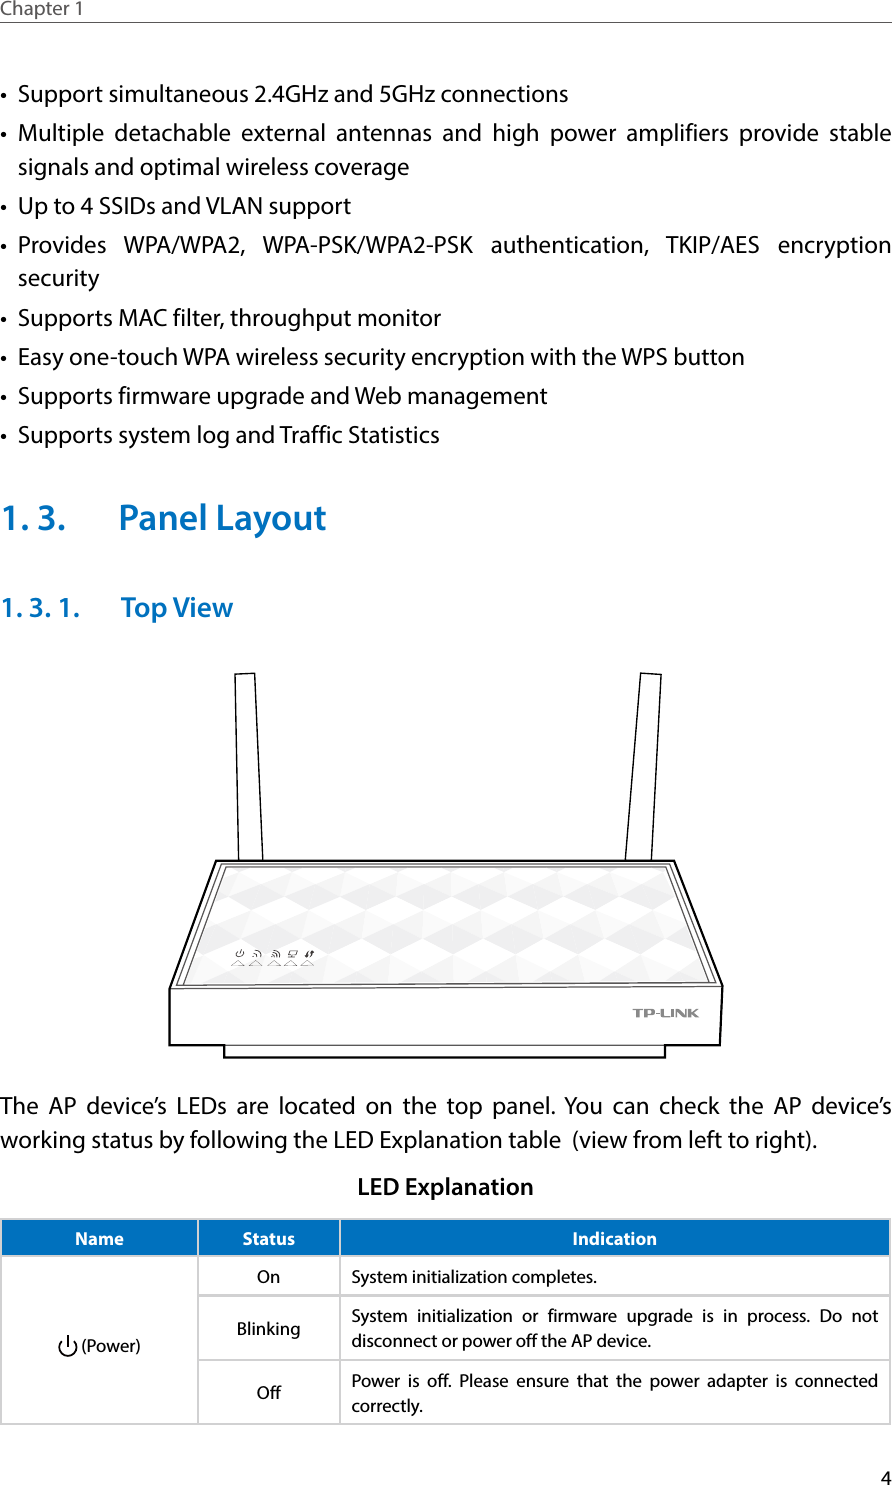 4Chapter 1  •  Support simultaneous 2.4GHz and 5GHz connections•  Multiple detachable external antennas and high power amplifiers provide stable signals and optimal wireless coverage•  Up to 4 SSIDs and VLAN support•  Provides WPA/WPA2, WPA-PSK/WPA2-PSK authentication, TKIP/AES encryption security•  Supports MAC filter, throughput monitor•  Easy one-touch WPA wireless security encryption with the WPS button•  Supports firmware upgrade and Web management•  Supports system log and Traffic Statistics1. 3.  Panel Layout1. 3. 1.  Top ViewThe AP device’s LEDs are located on the top panel. You can check the AP device’s working status by following the LED Explanation table  (view from left to right).LED ExplanationName Status Indication (Power)On System initialization completes.Blinking System initialization or firmware upgrade is in process. Do not disconnect or power off the AP device.Off Power is off. Please ensure that the power adapter is connected correctly.